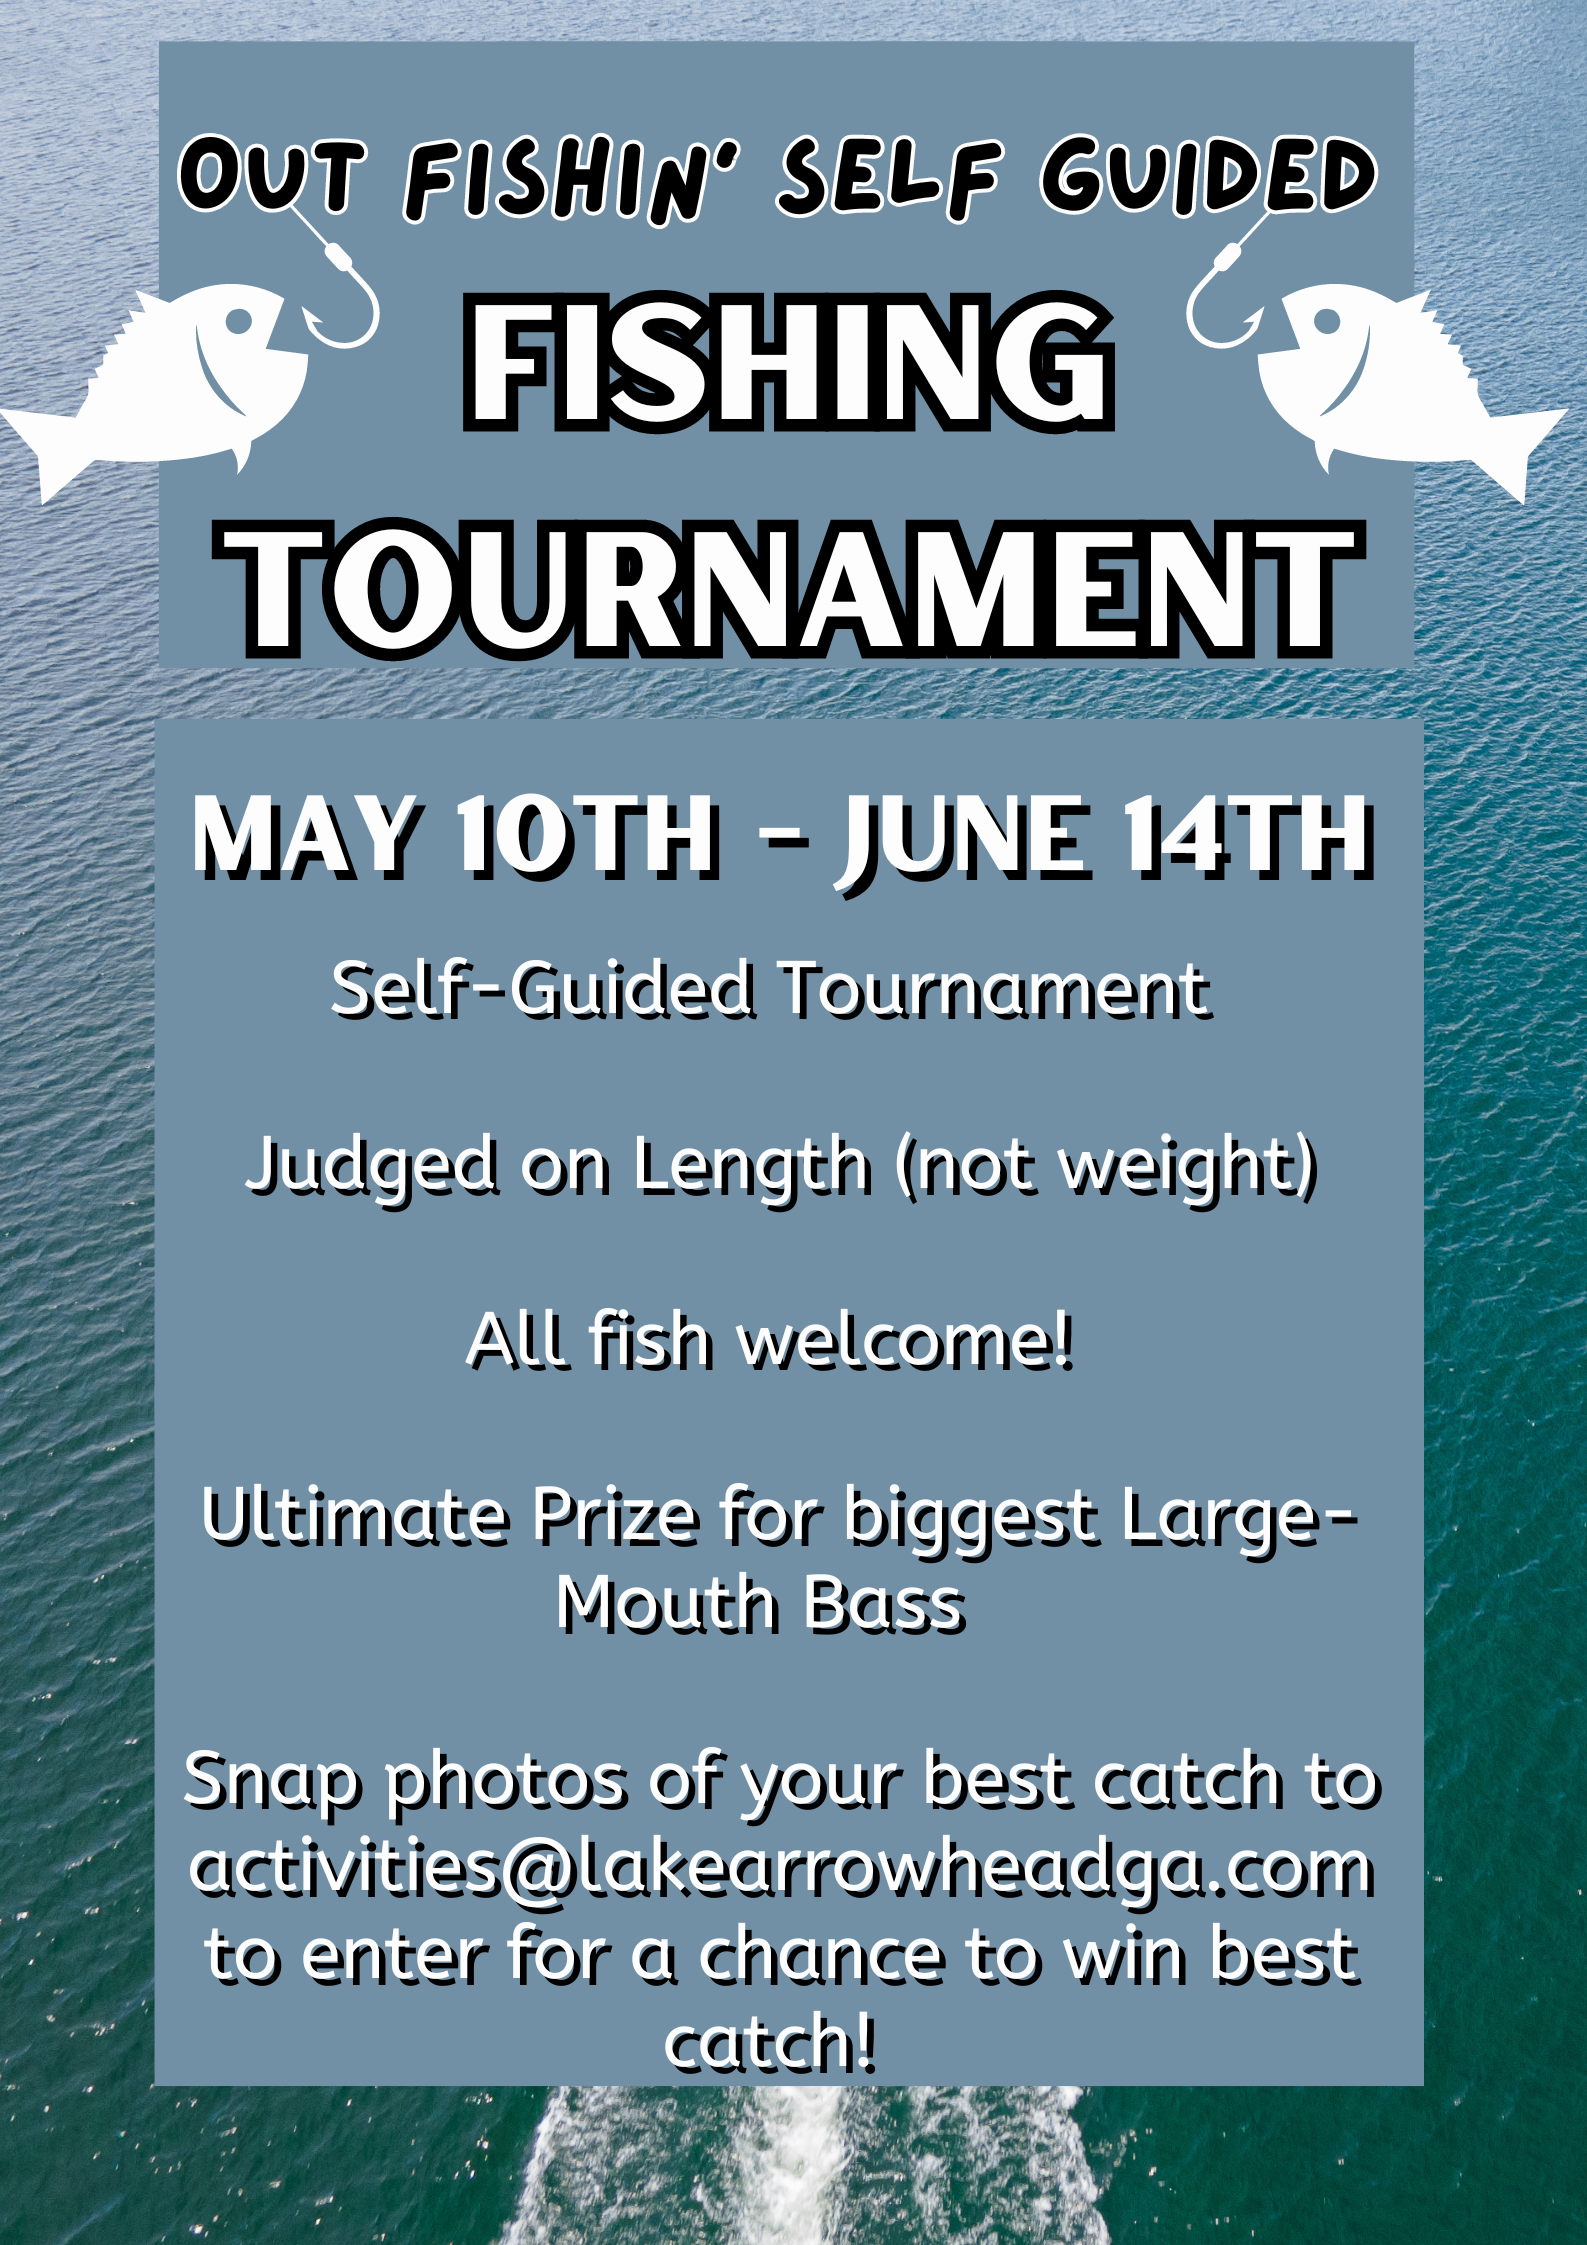 Gone Fishin Self Guided Fishing Tournament May 10th June 14th